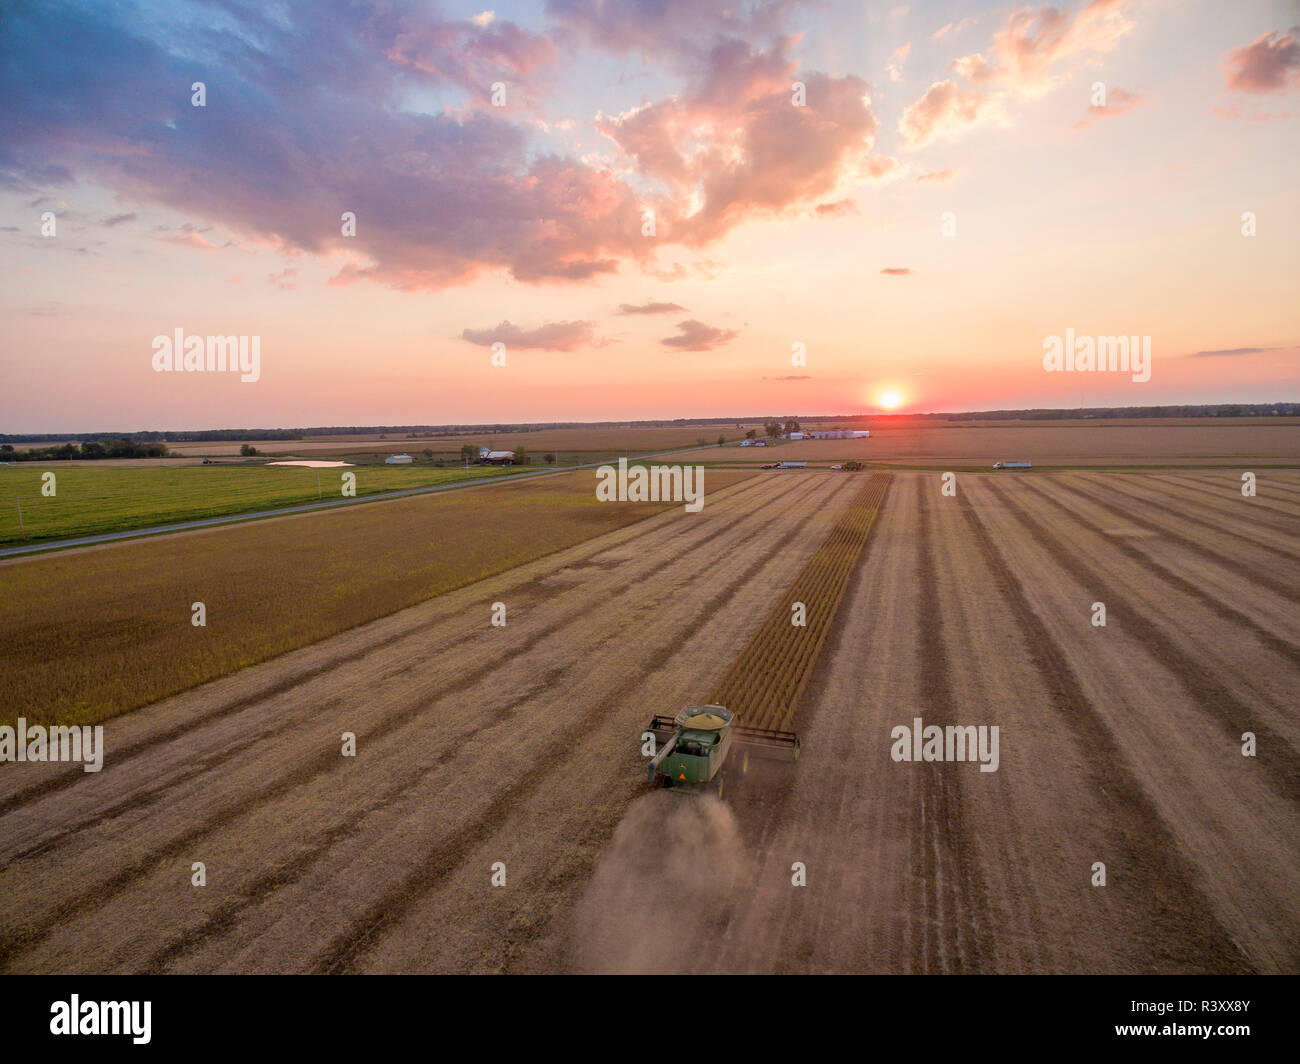 Soybean harvest, John Deere combine harvesting soybeans at sunset, Marion County, Illinois Stock Photo